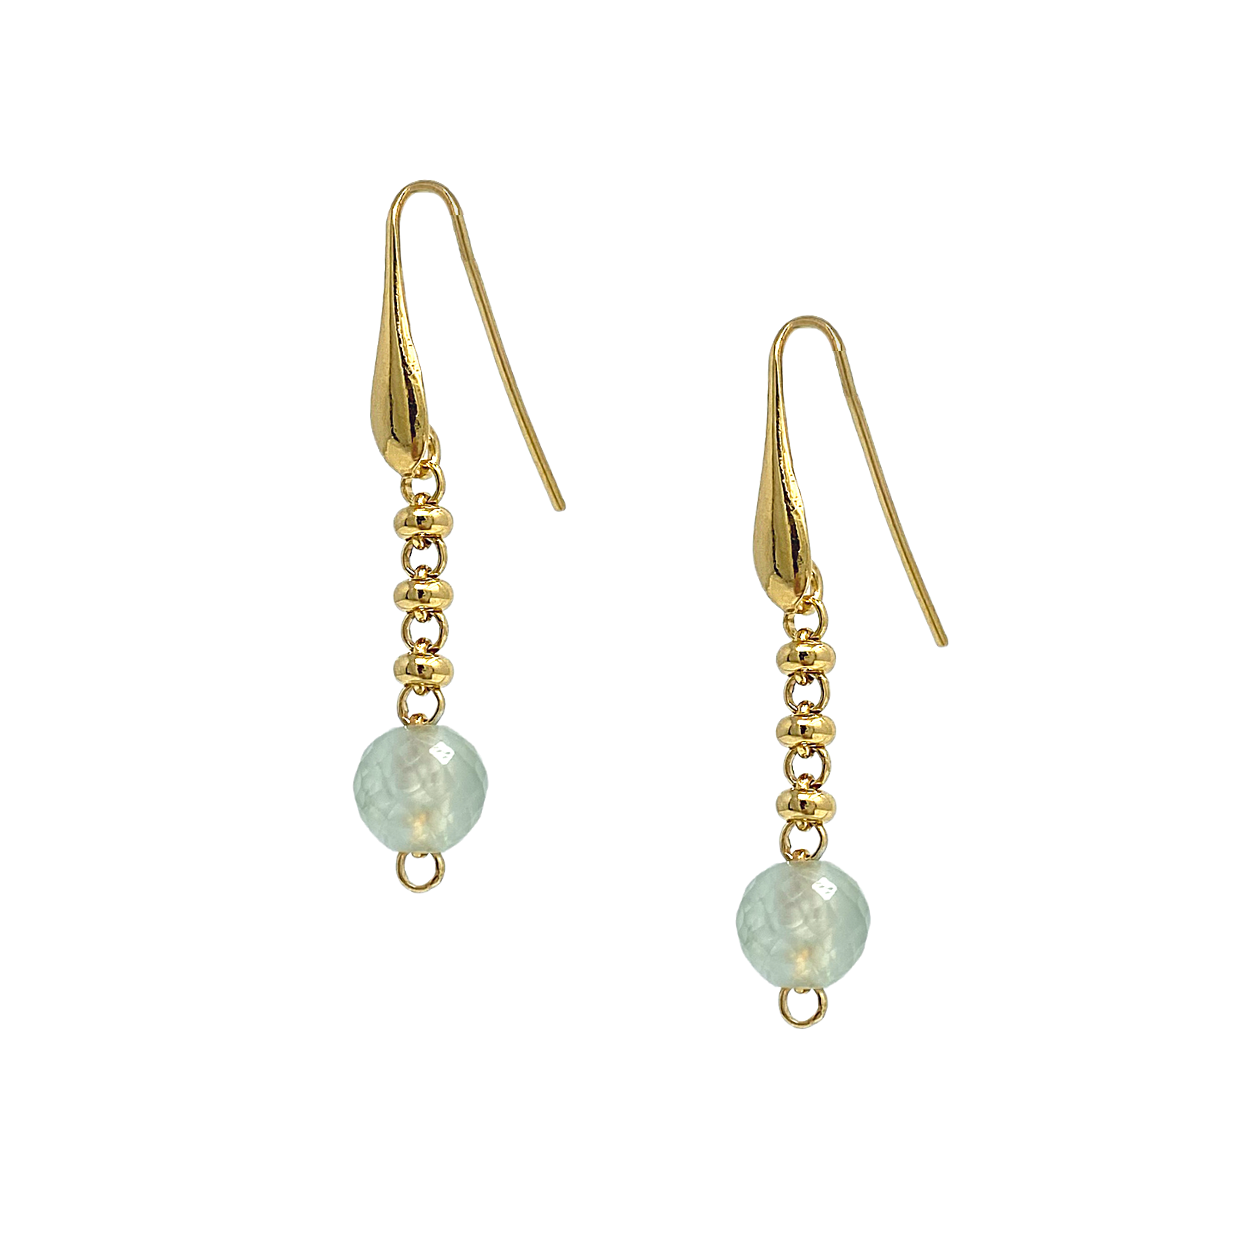 Bubbles Color Earrings in Gold with Prehnite